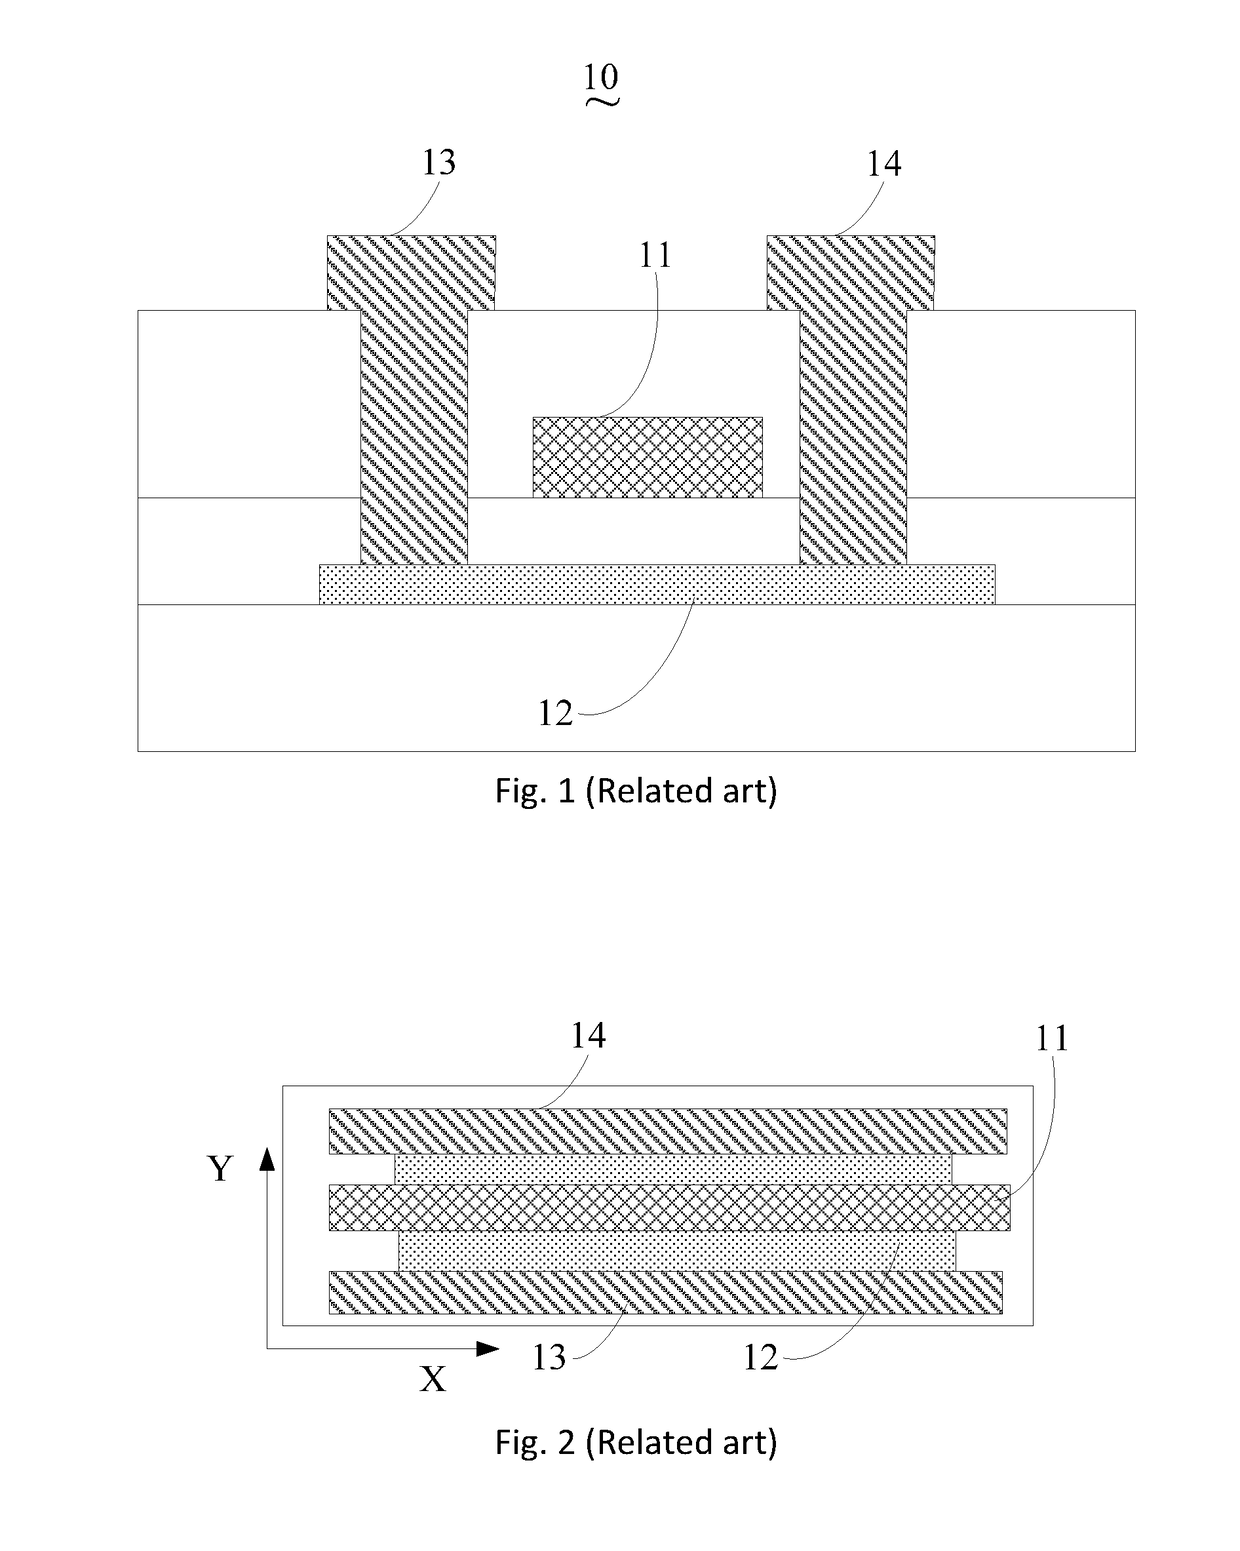 Thin film transistor, TFT substrate, and display panel